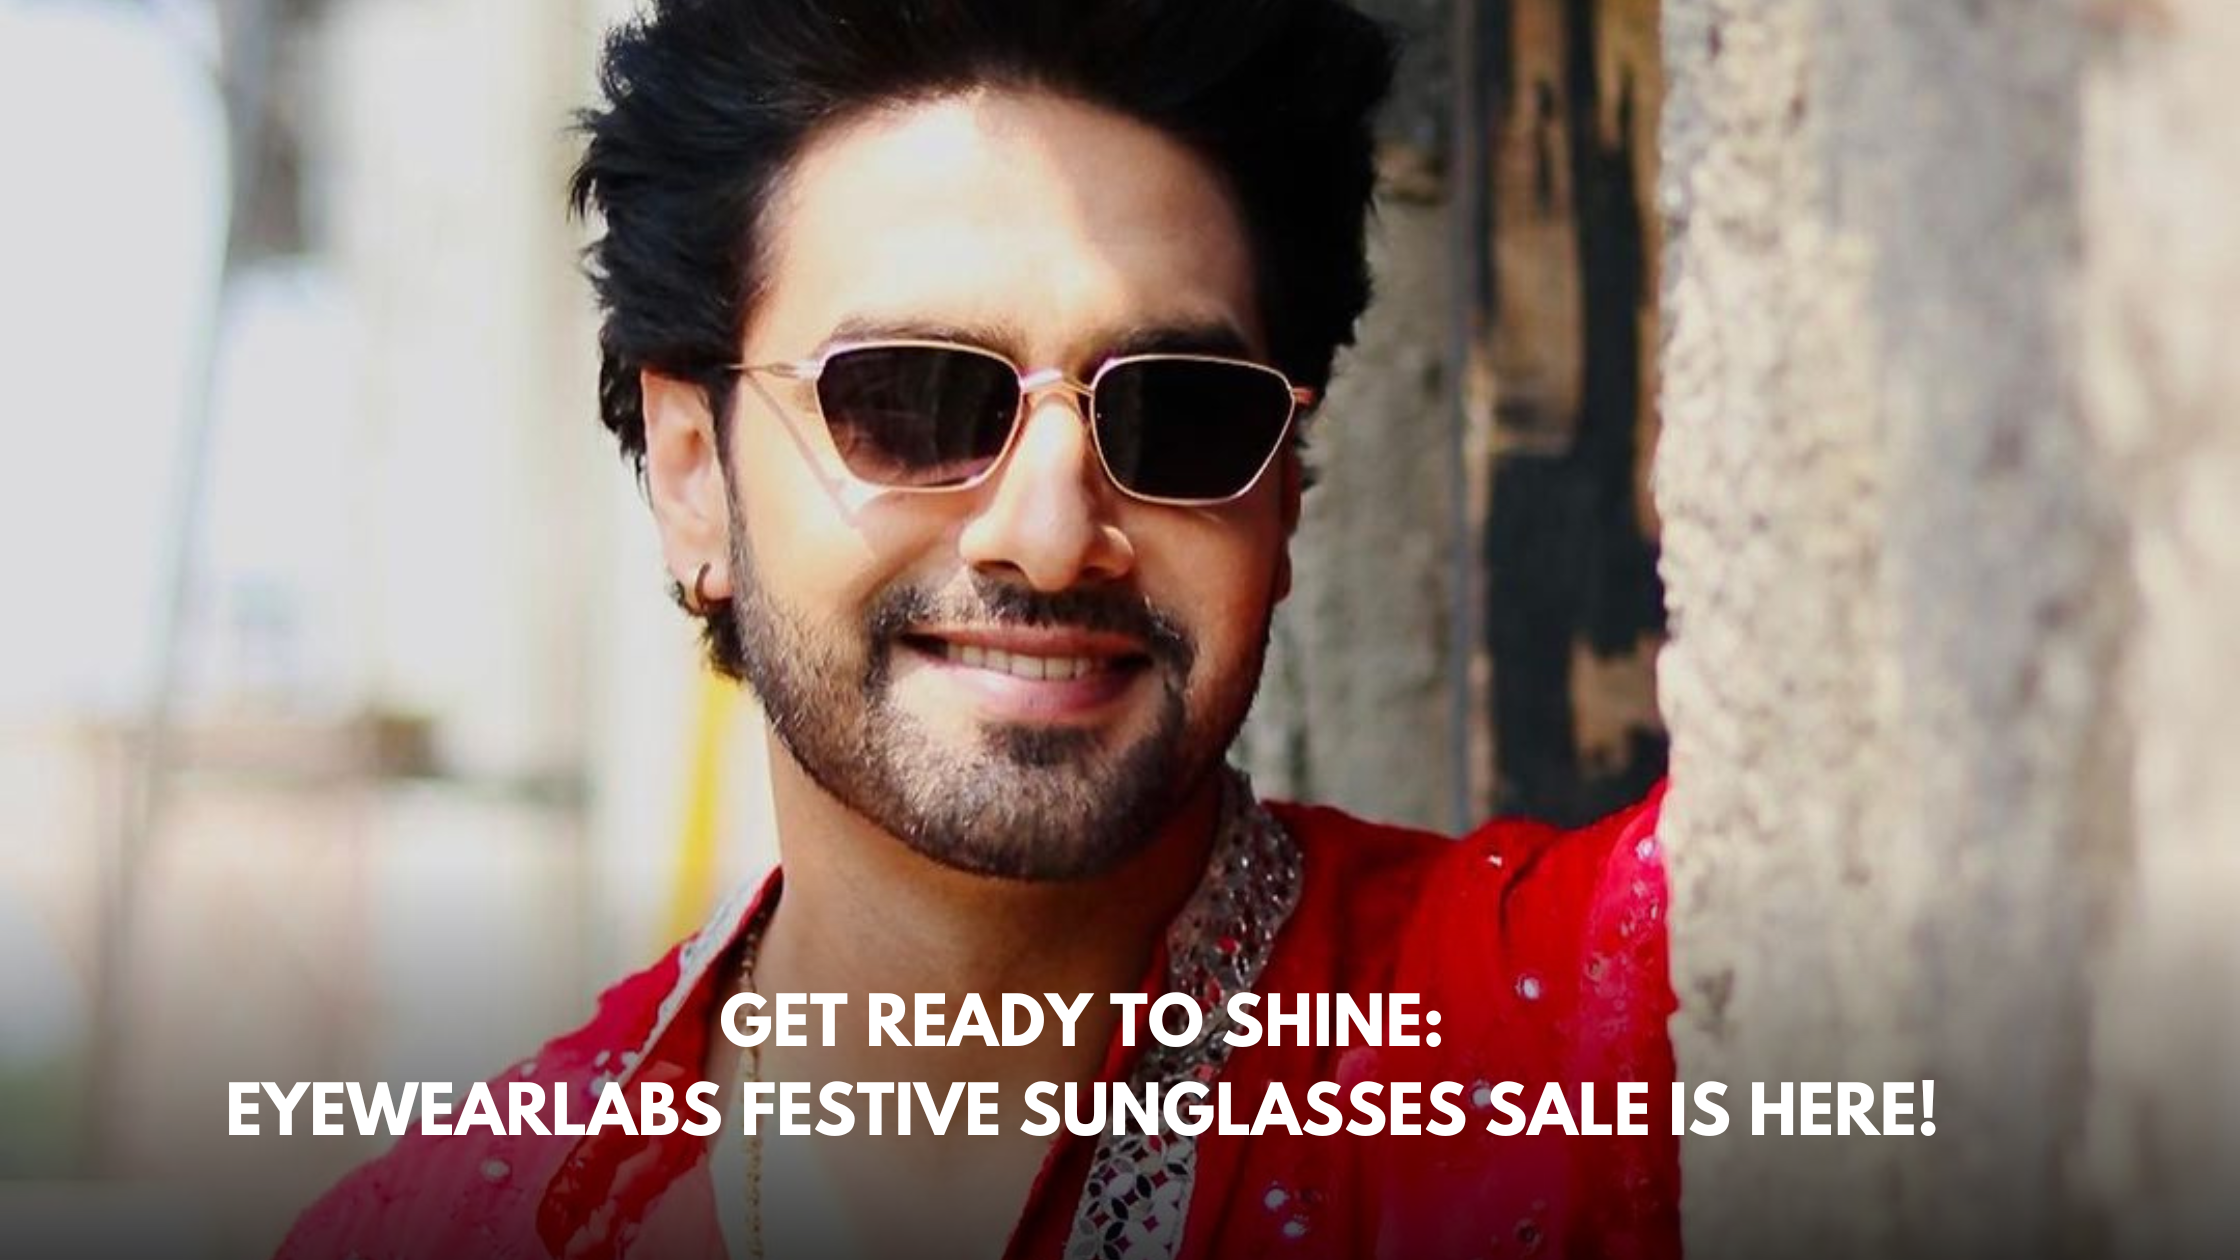 Get Ready to Shine: Eyewearlabs Festive Sunglasses Sale is Here!